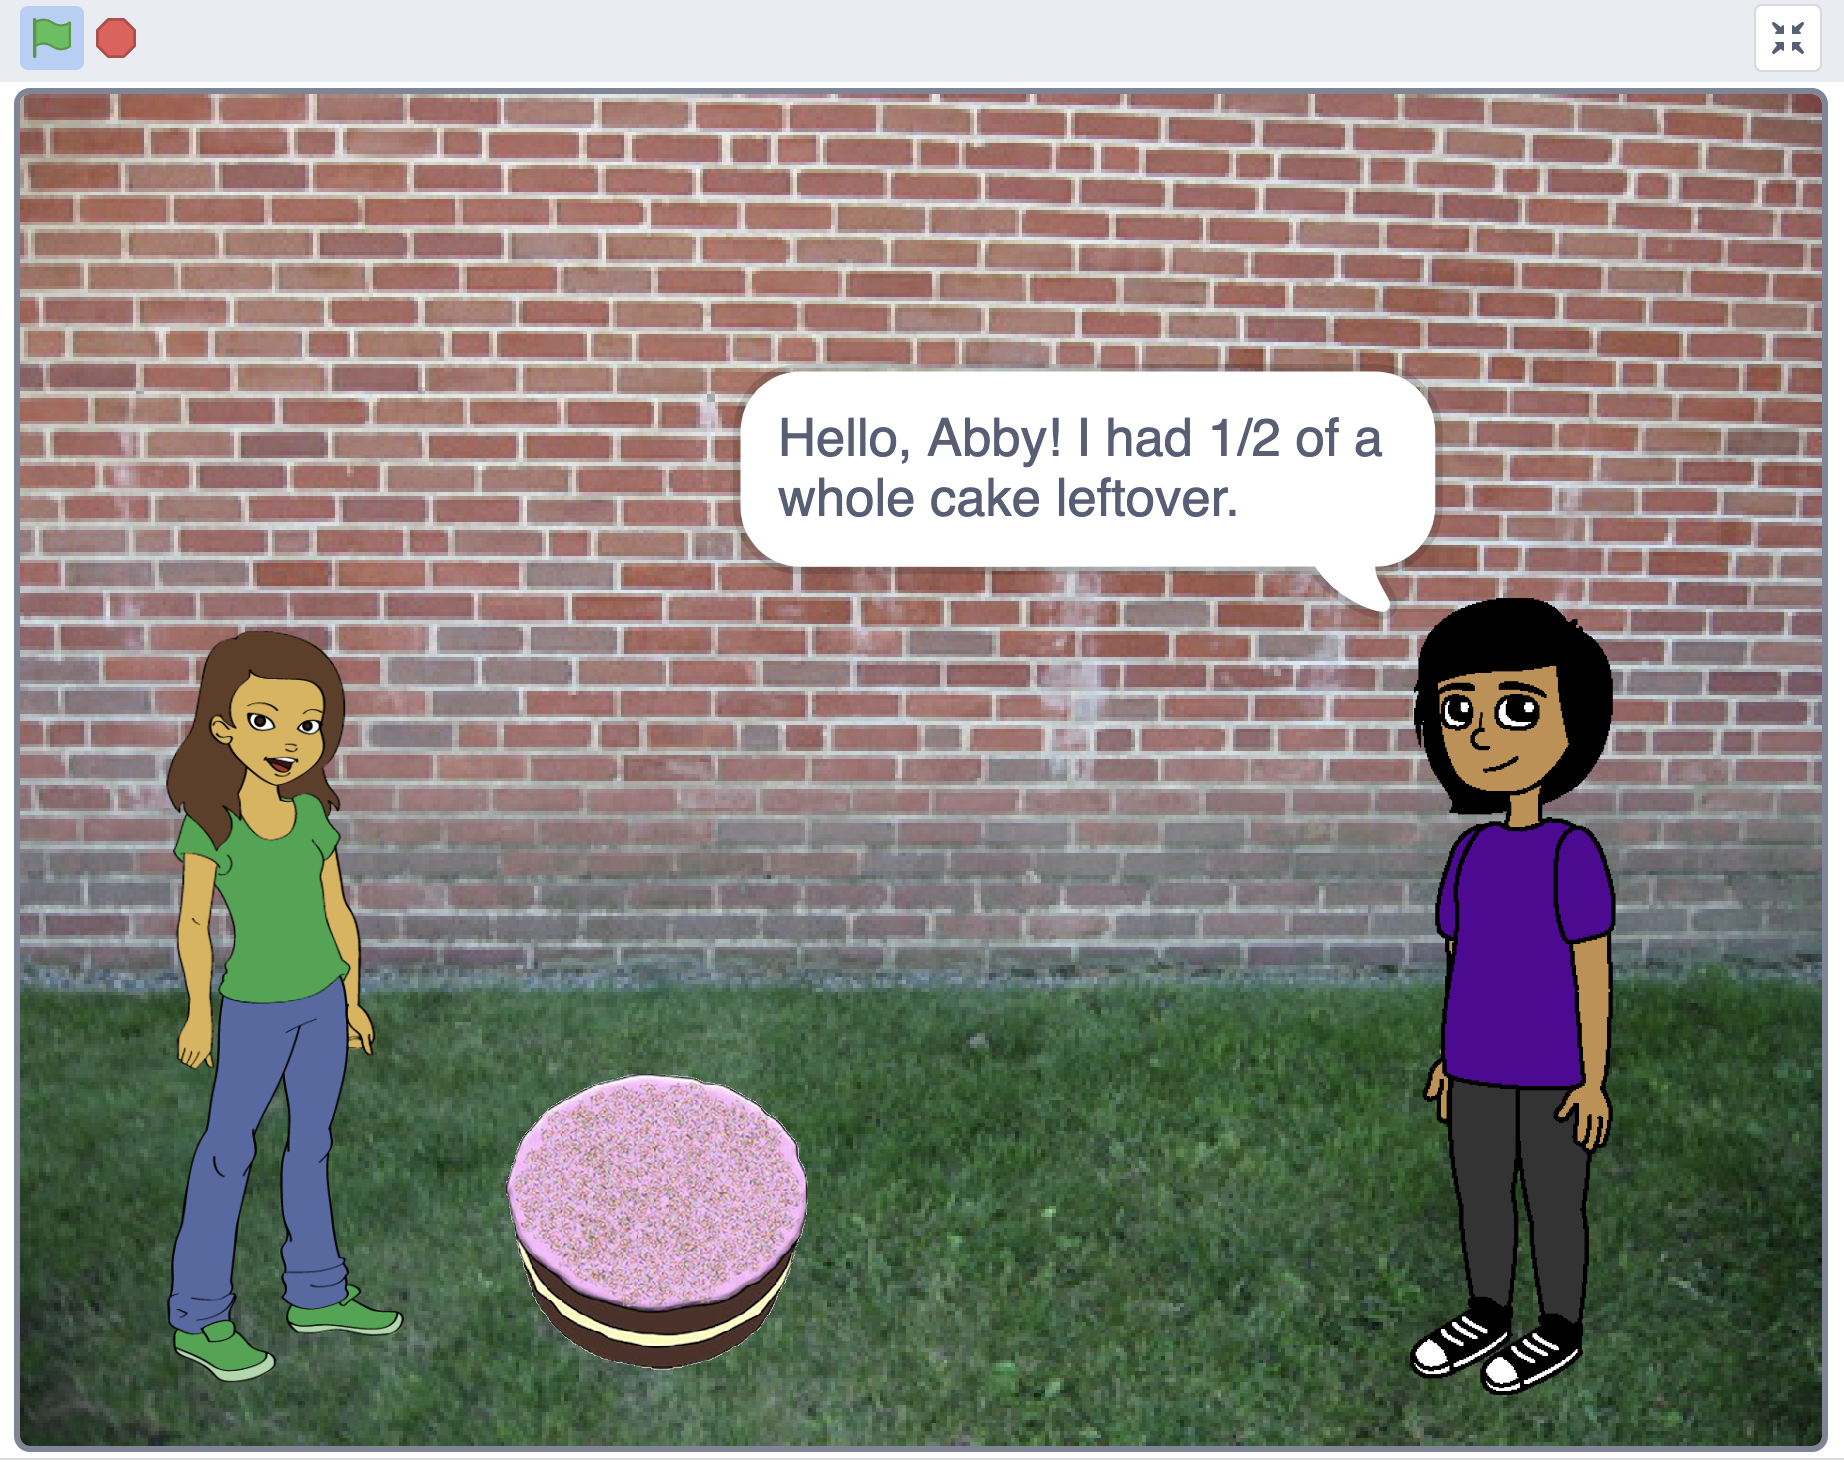 Scratch project stage depicting two sprites standing in the grass with a brick wall behind them. A cake is between the two sprites. One sprite says, "Hello, Abby! I had 1/2 of a whole cake left over".